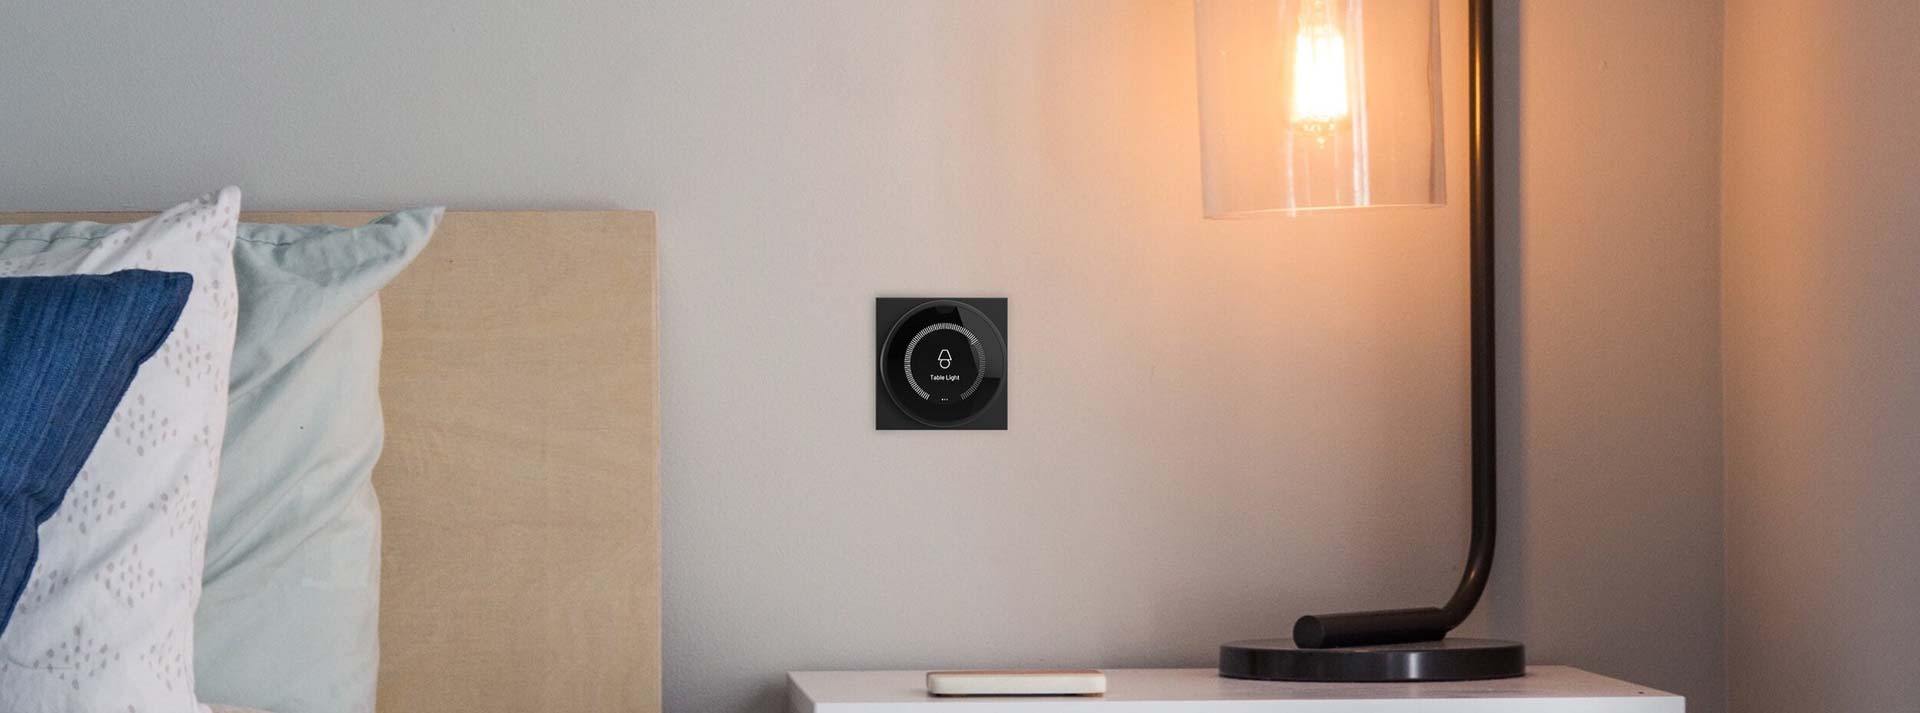 Room Controller - Led Benevento